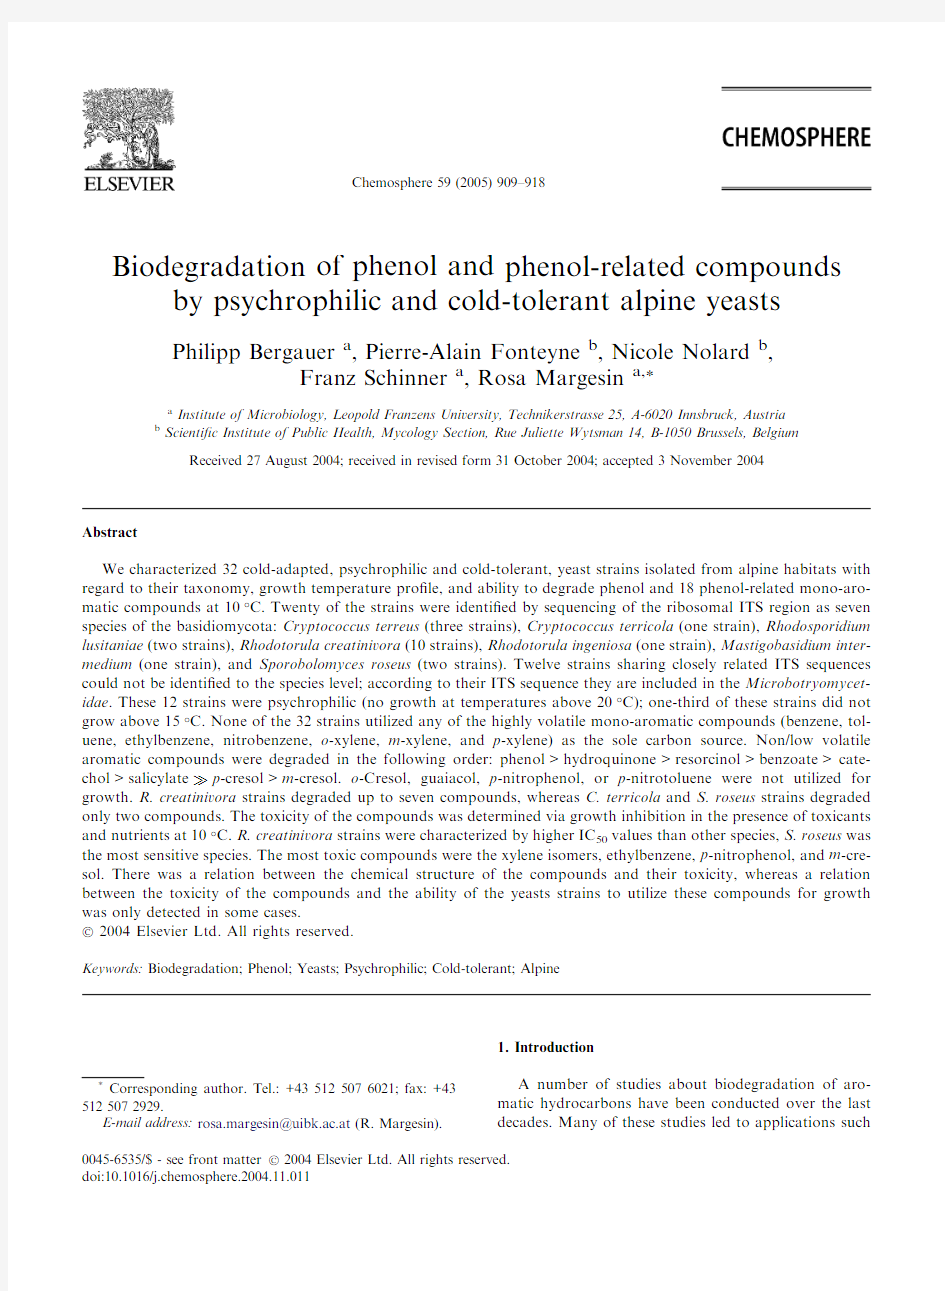 Biodegradation of phenol and phenol-related compounds